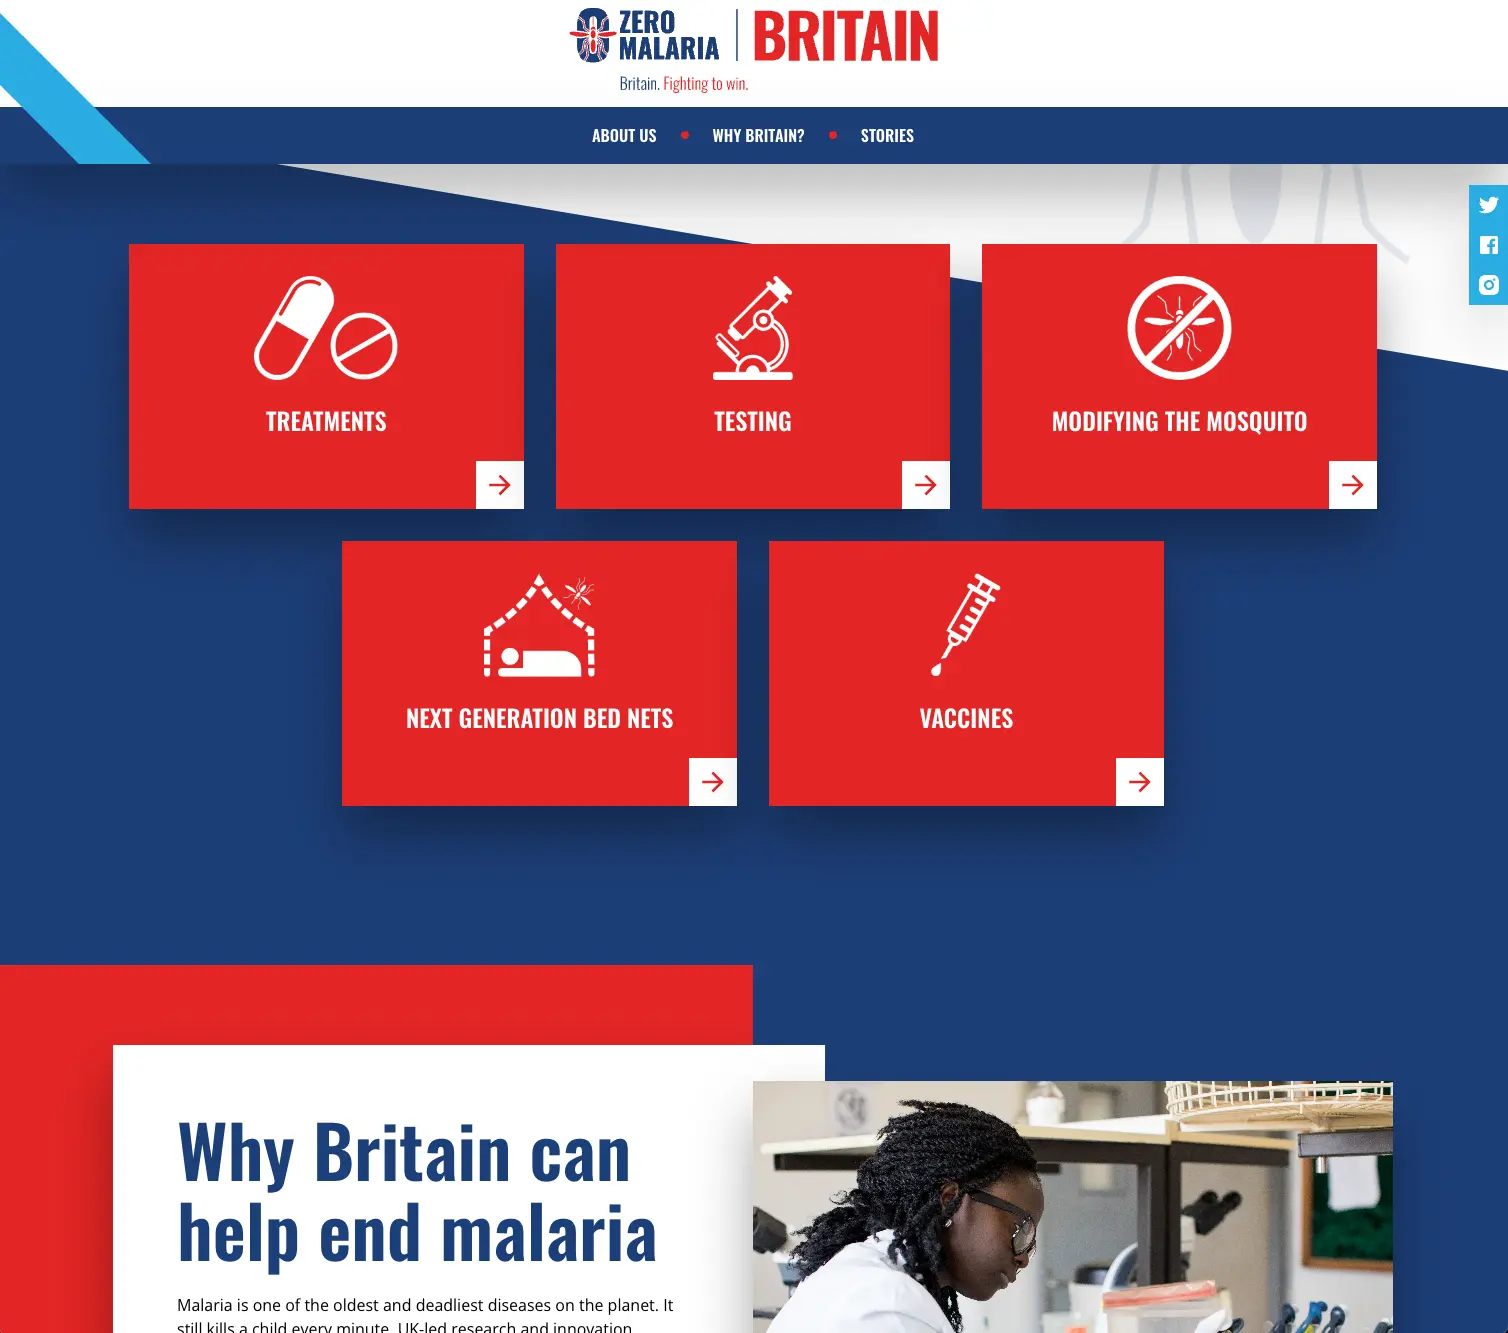 Small page snippet from the Zero Malaria UK website